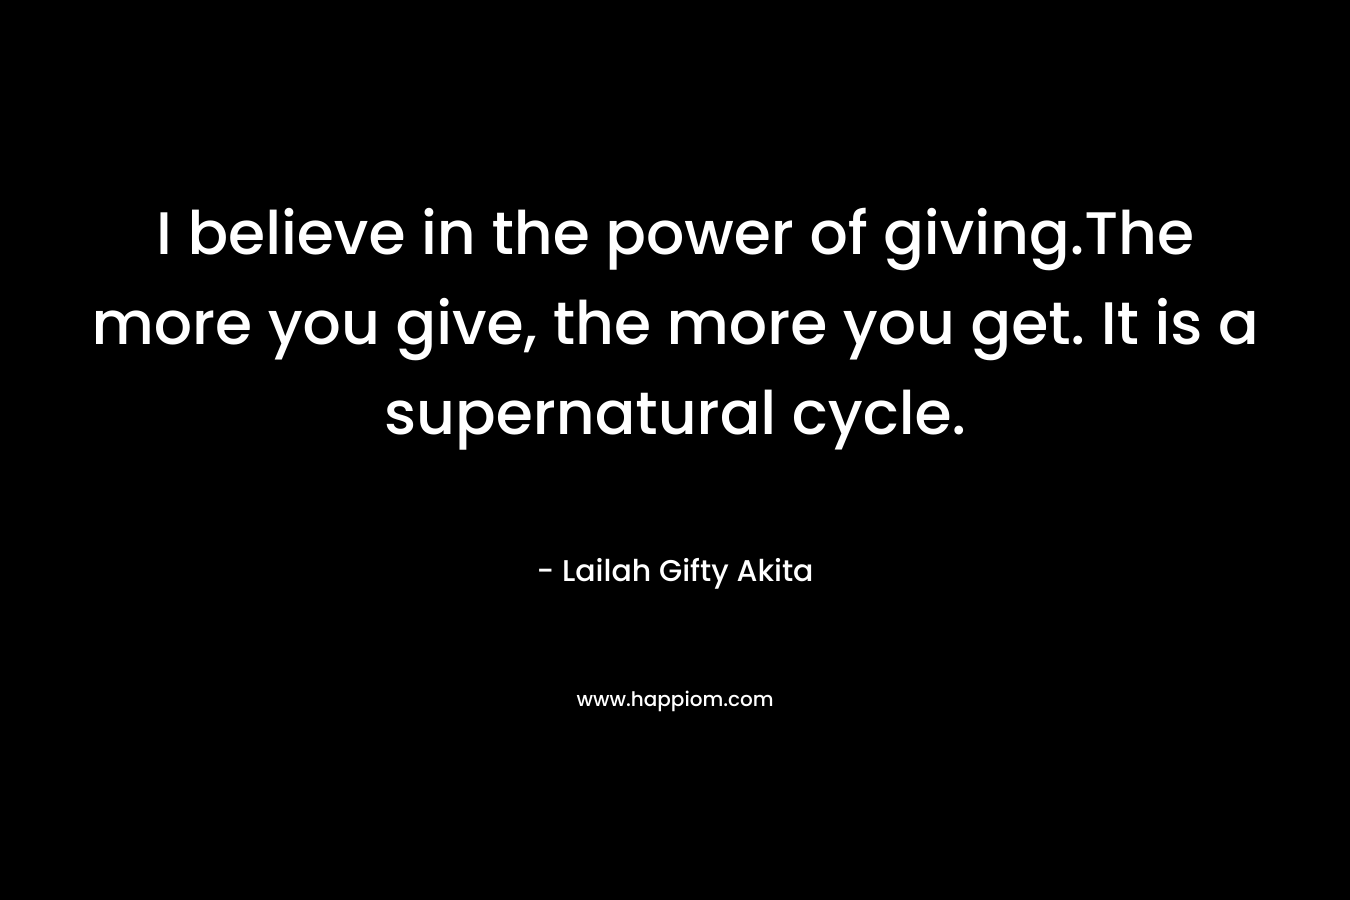 I believe in the power of giving.The more you give, the more you get. It is a supernatural cycle.